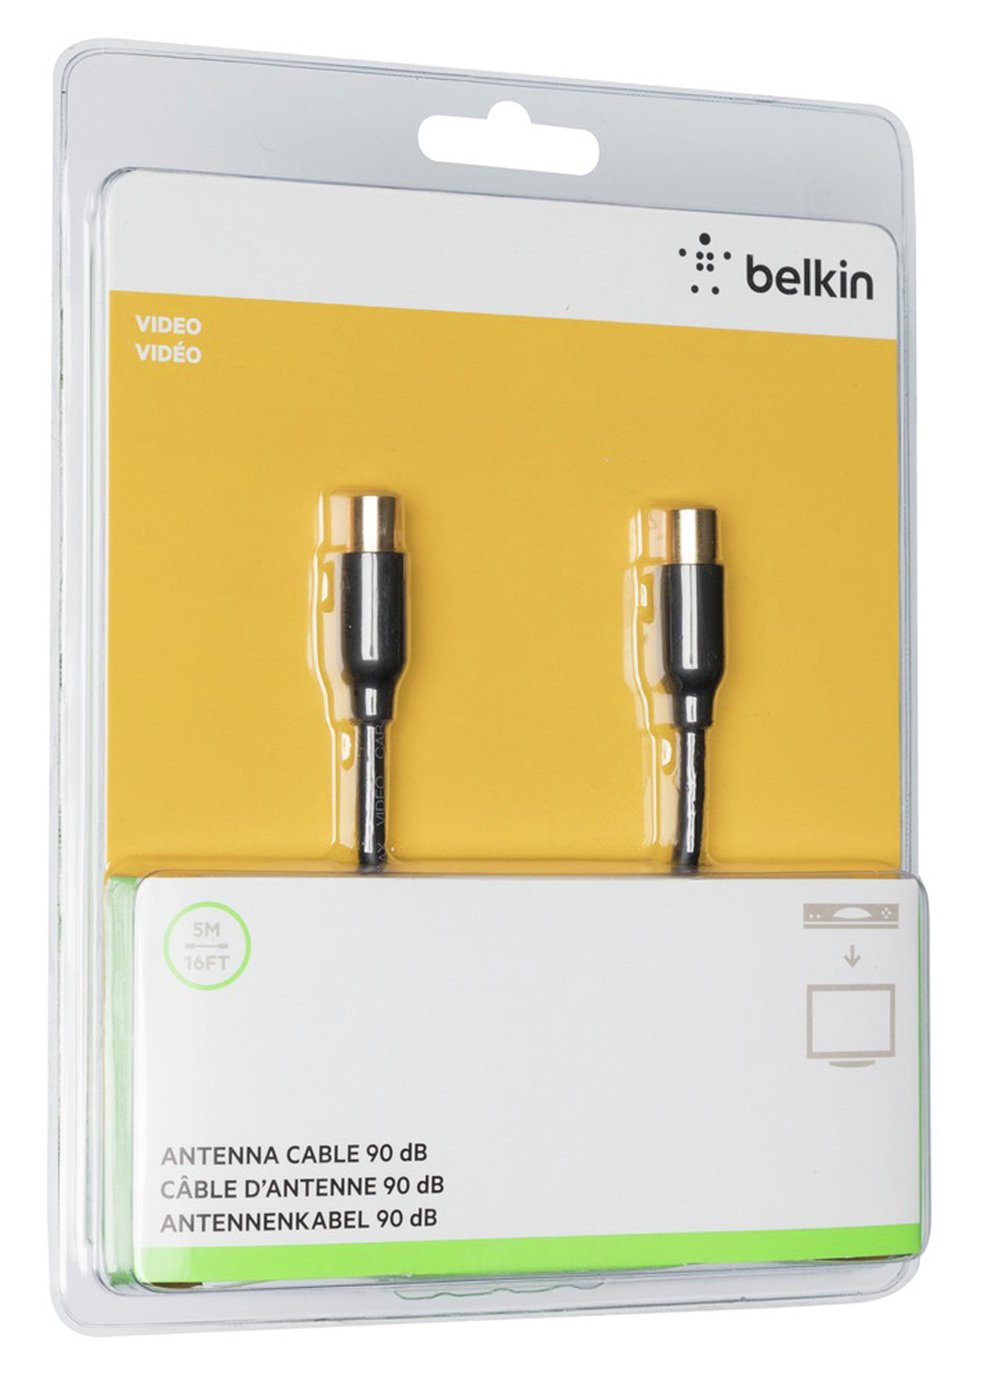 Belkin 5m Coax Aerial Cable Review